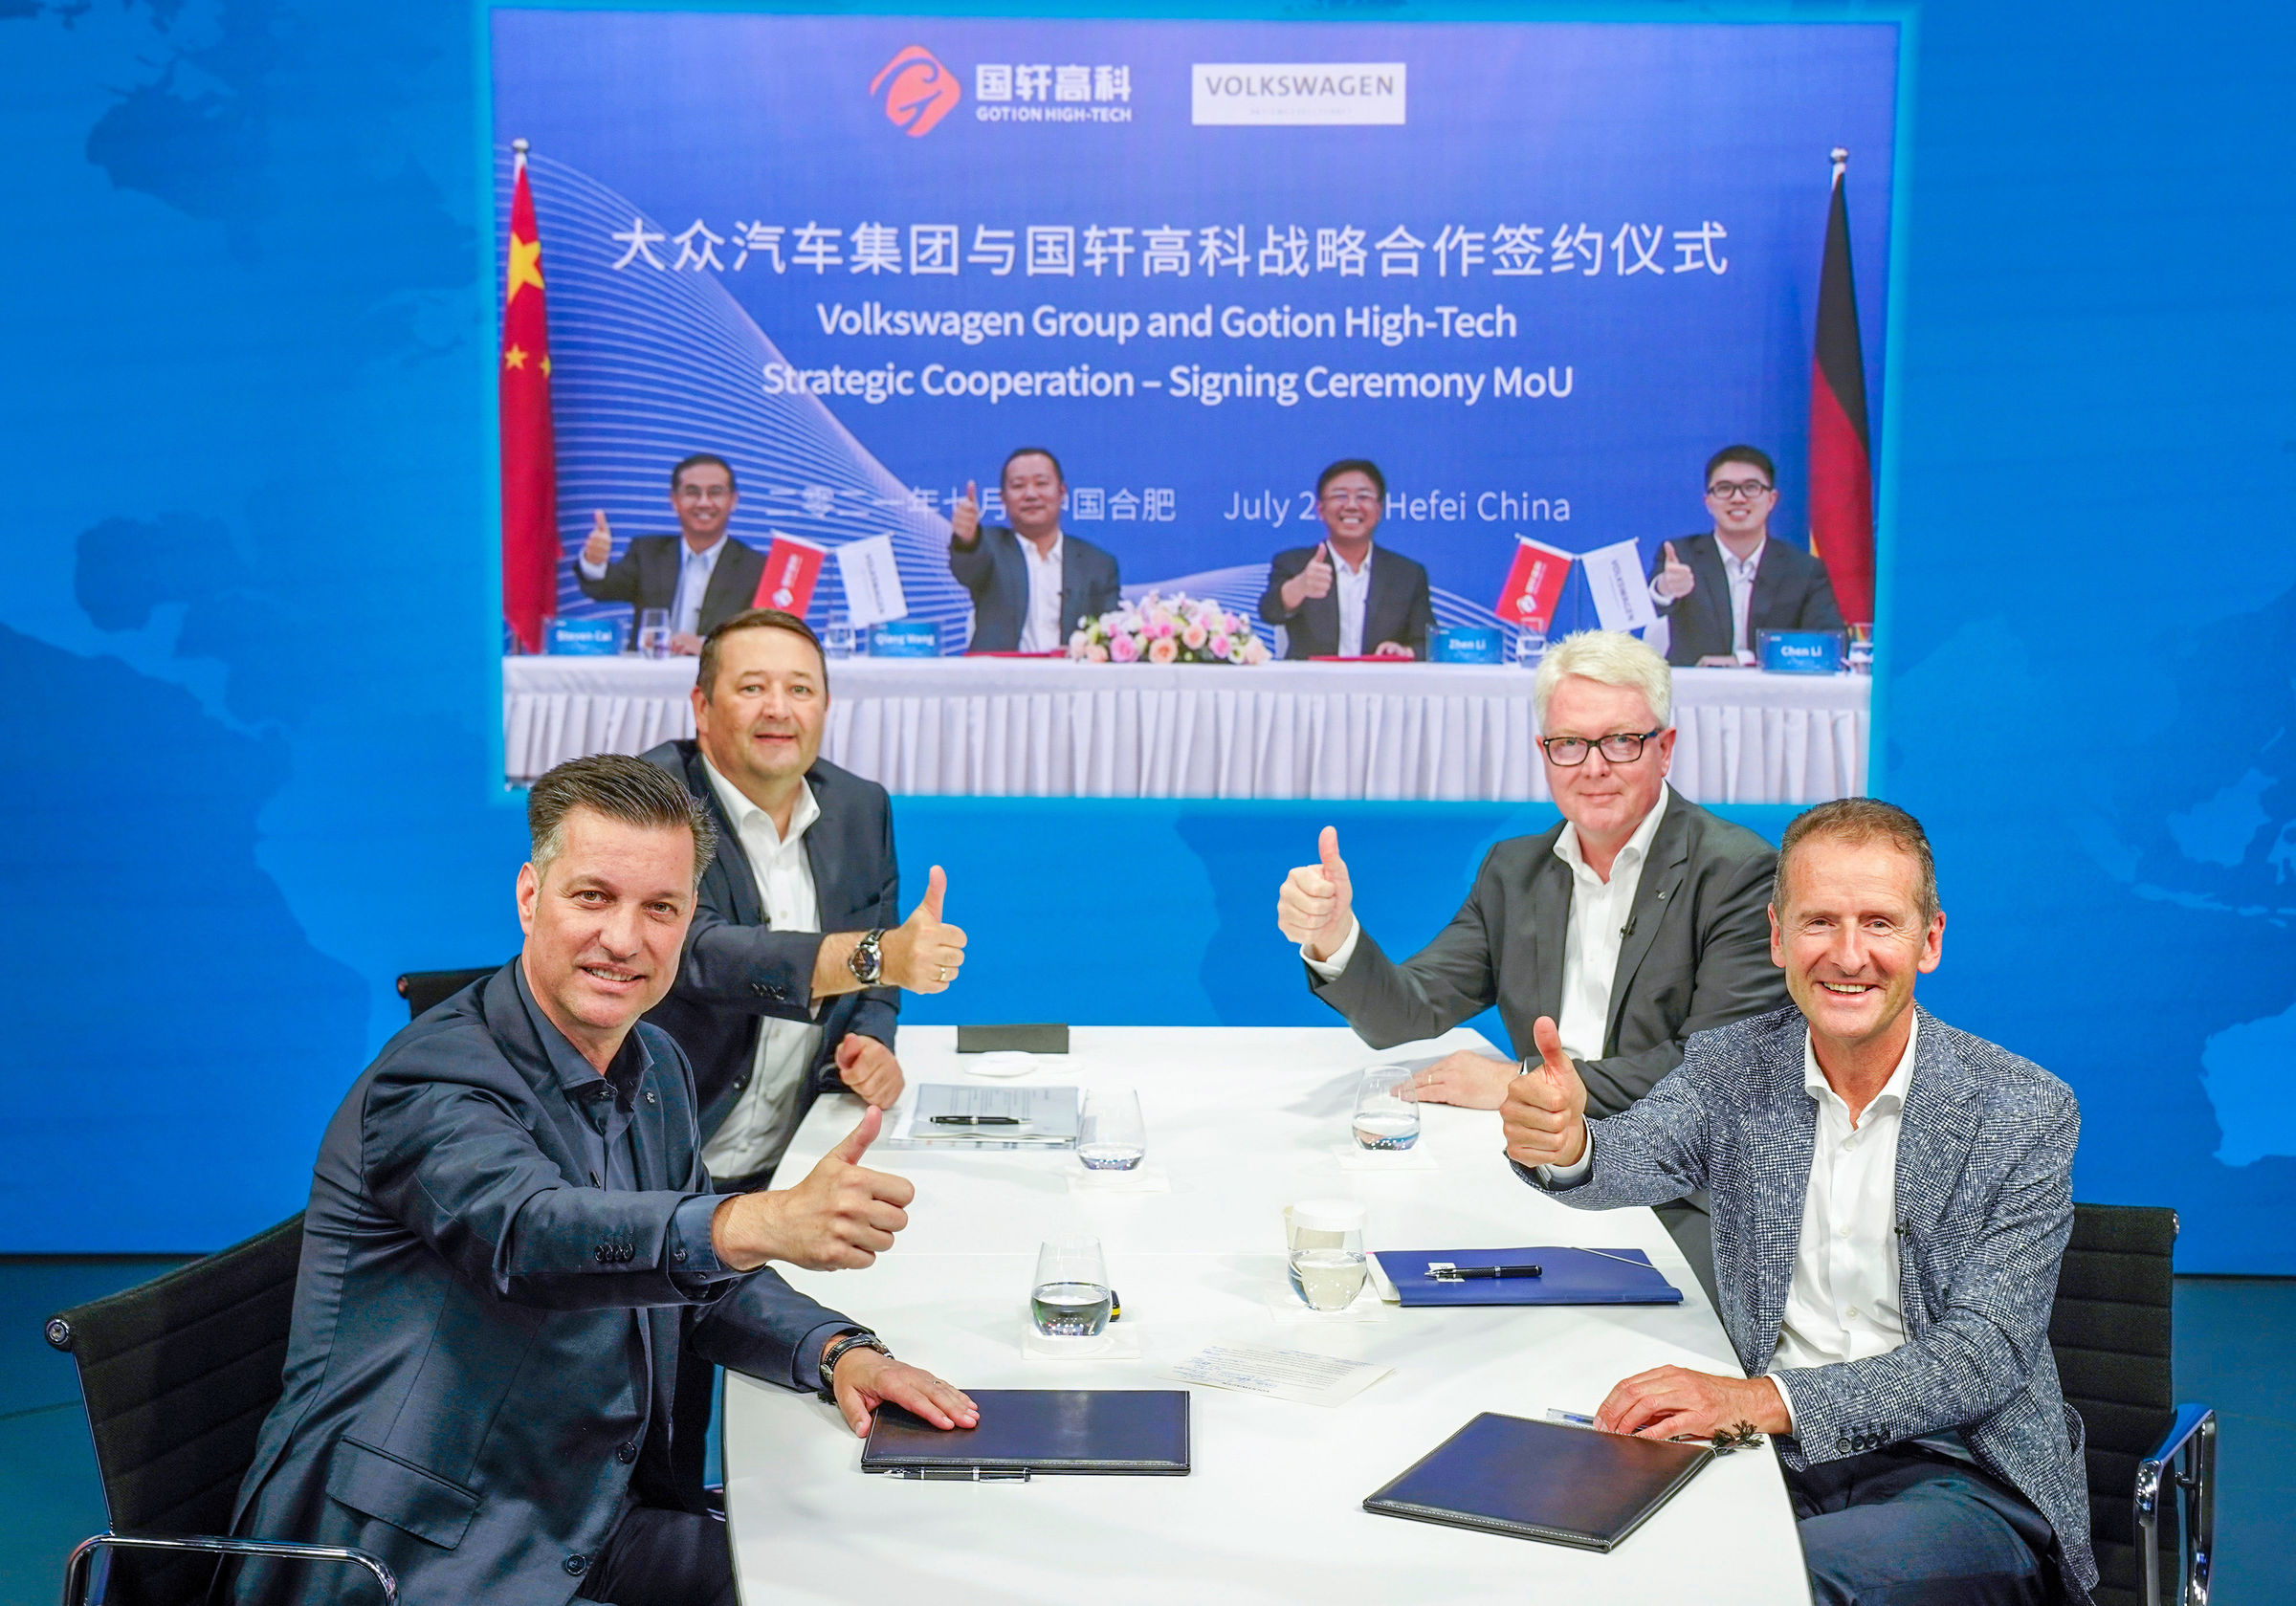 Volkswagen Group will develop the first generation of standard electric vehicle batteries with Guoxuan High-Tech Co., Ltd.